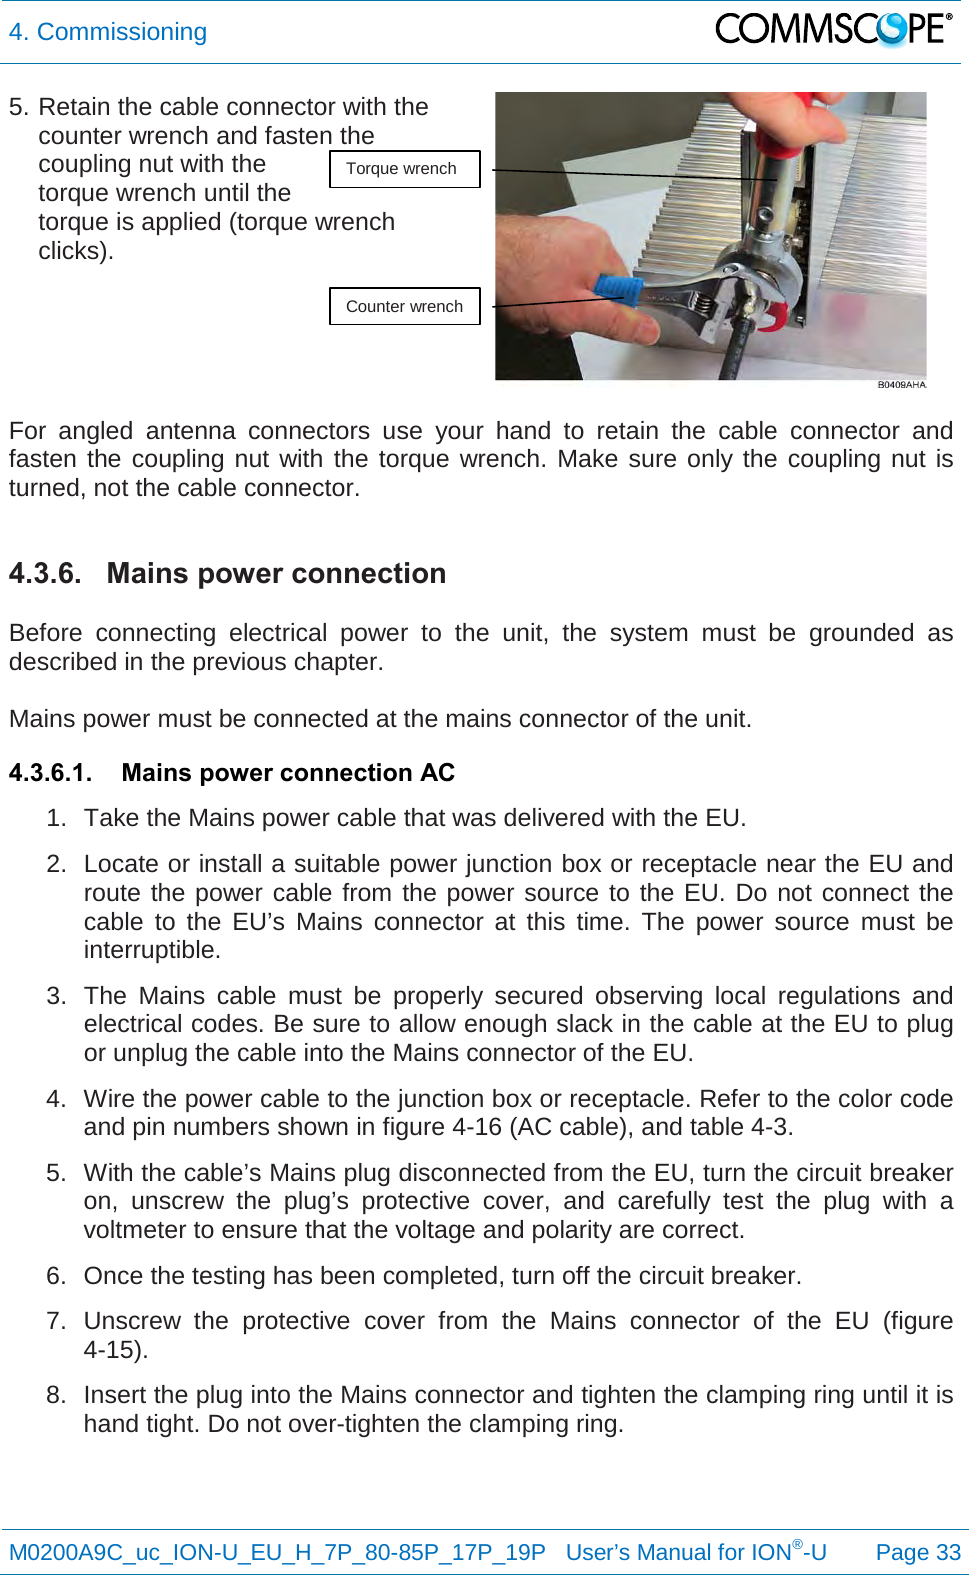 4. Commissioning   M0200A9C_uc_ION-U_EU_H_7P_80-85P_17P_19P   User’s Manual for ION®-U  Page 33  5. Retain the cable connector with the counter wrench and fasten the coupling nut with the torque wrench until the  torque is applied (torque wrench clicks).    For angled antenna connectors use your hand to retain the cable connector and fasten the coupling nut with the torque wrench. Make sure only the coupling nut is turned, not the cable connector.  4.3.6. Mains power connection  Before connecting electrical power to the unit, the system must be grounded as described in the previous chapter.  Mains power must be connected at the mains connector of the unit. 4.3.6.1. Mains power connection AC 1. Take the Mains power cable that was delivered with the EU. 2. Locate or install a suitable power junction box or receptacle near the EU and route the power cable from the power source to the EU. Do not connect the cable to the EU’s Mains connector at this time. The power source must be interruptible. 3. The Mains cable must be properly secured observing local regulations and electrical codes. Be sure to allow enough slack in the cable at the EU to plug or unplug the cable into the Mains connector of the EU. 4. Wire the power cable to the junction box or receptacle. Refer to the color code and pin numbers shown in figure 4-16 (AC cable), and table 4-3. 5. With the cable’s Mains plug disconnected from the EU, turn the circuit breaker on, unscrew the plug’s protective cover, and carefully test the plug with a voltmeter to ensure that the voltage and polarity are correct. 6. Once the testing has been completed, turn off the circuit breaker. 7.  Unscrew  the protective cover from the Mains connector of the EU (figure 4-15). 8. Insert the plug into the Mains connector and tighten the clamping ring until it is hand tight. Do not over-tighten the clamping ring.    Torque wrench Counter wrench 